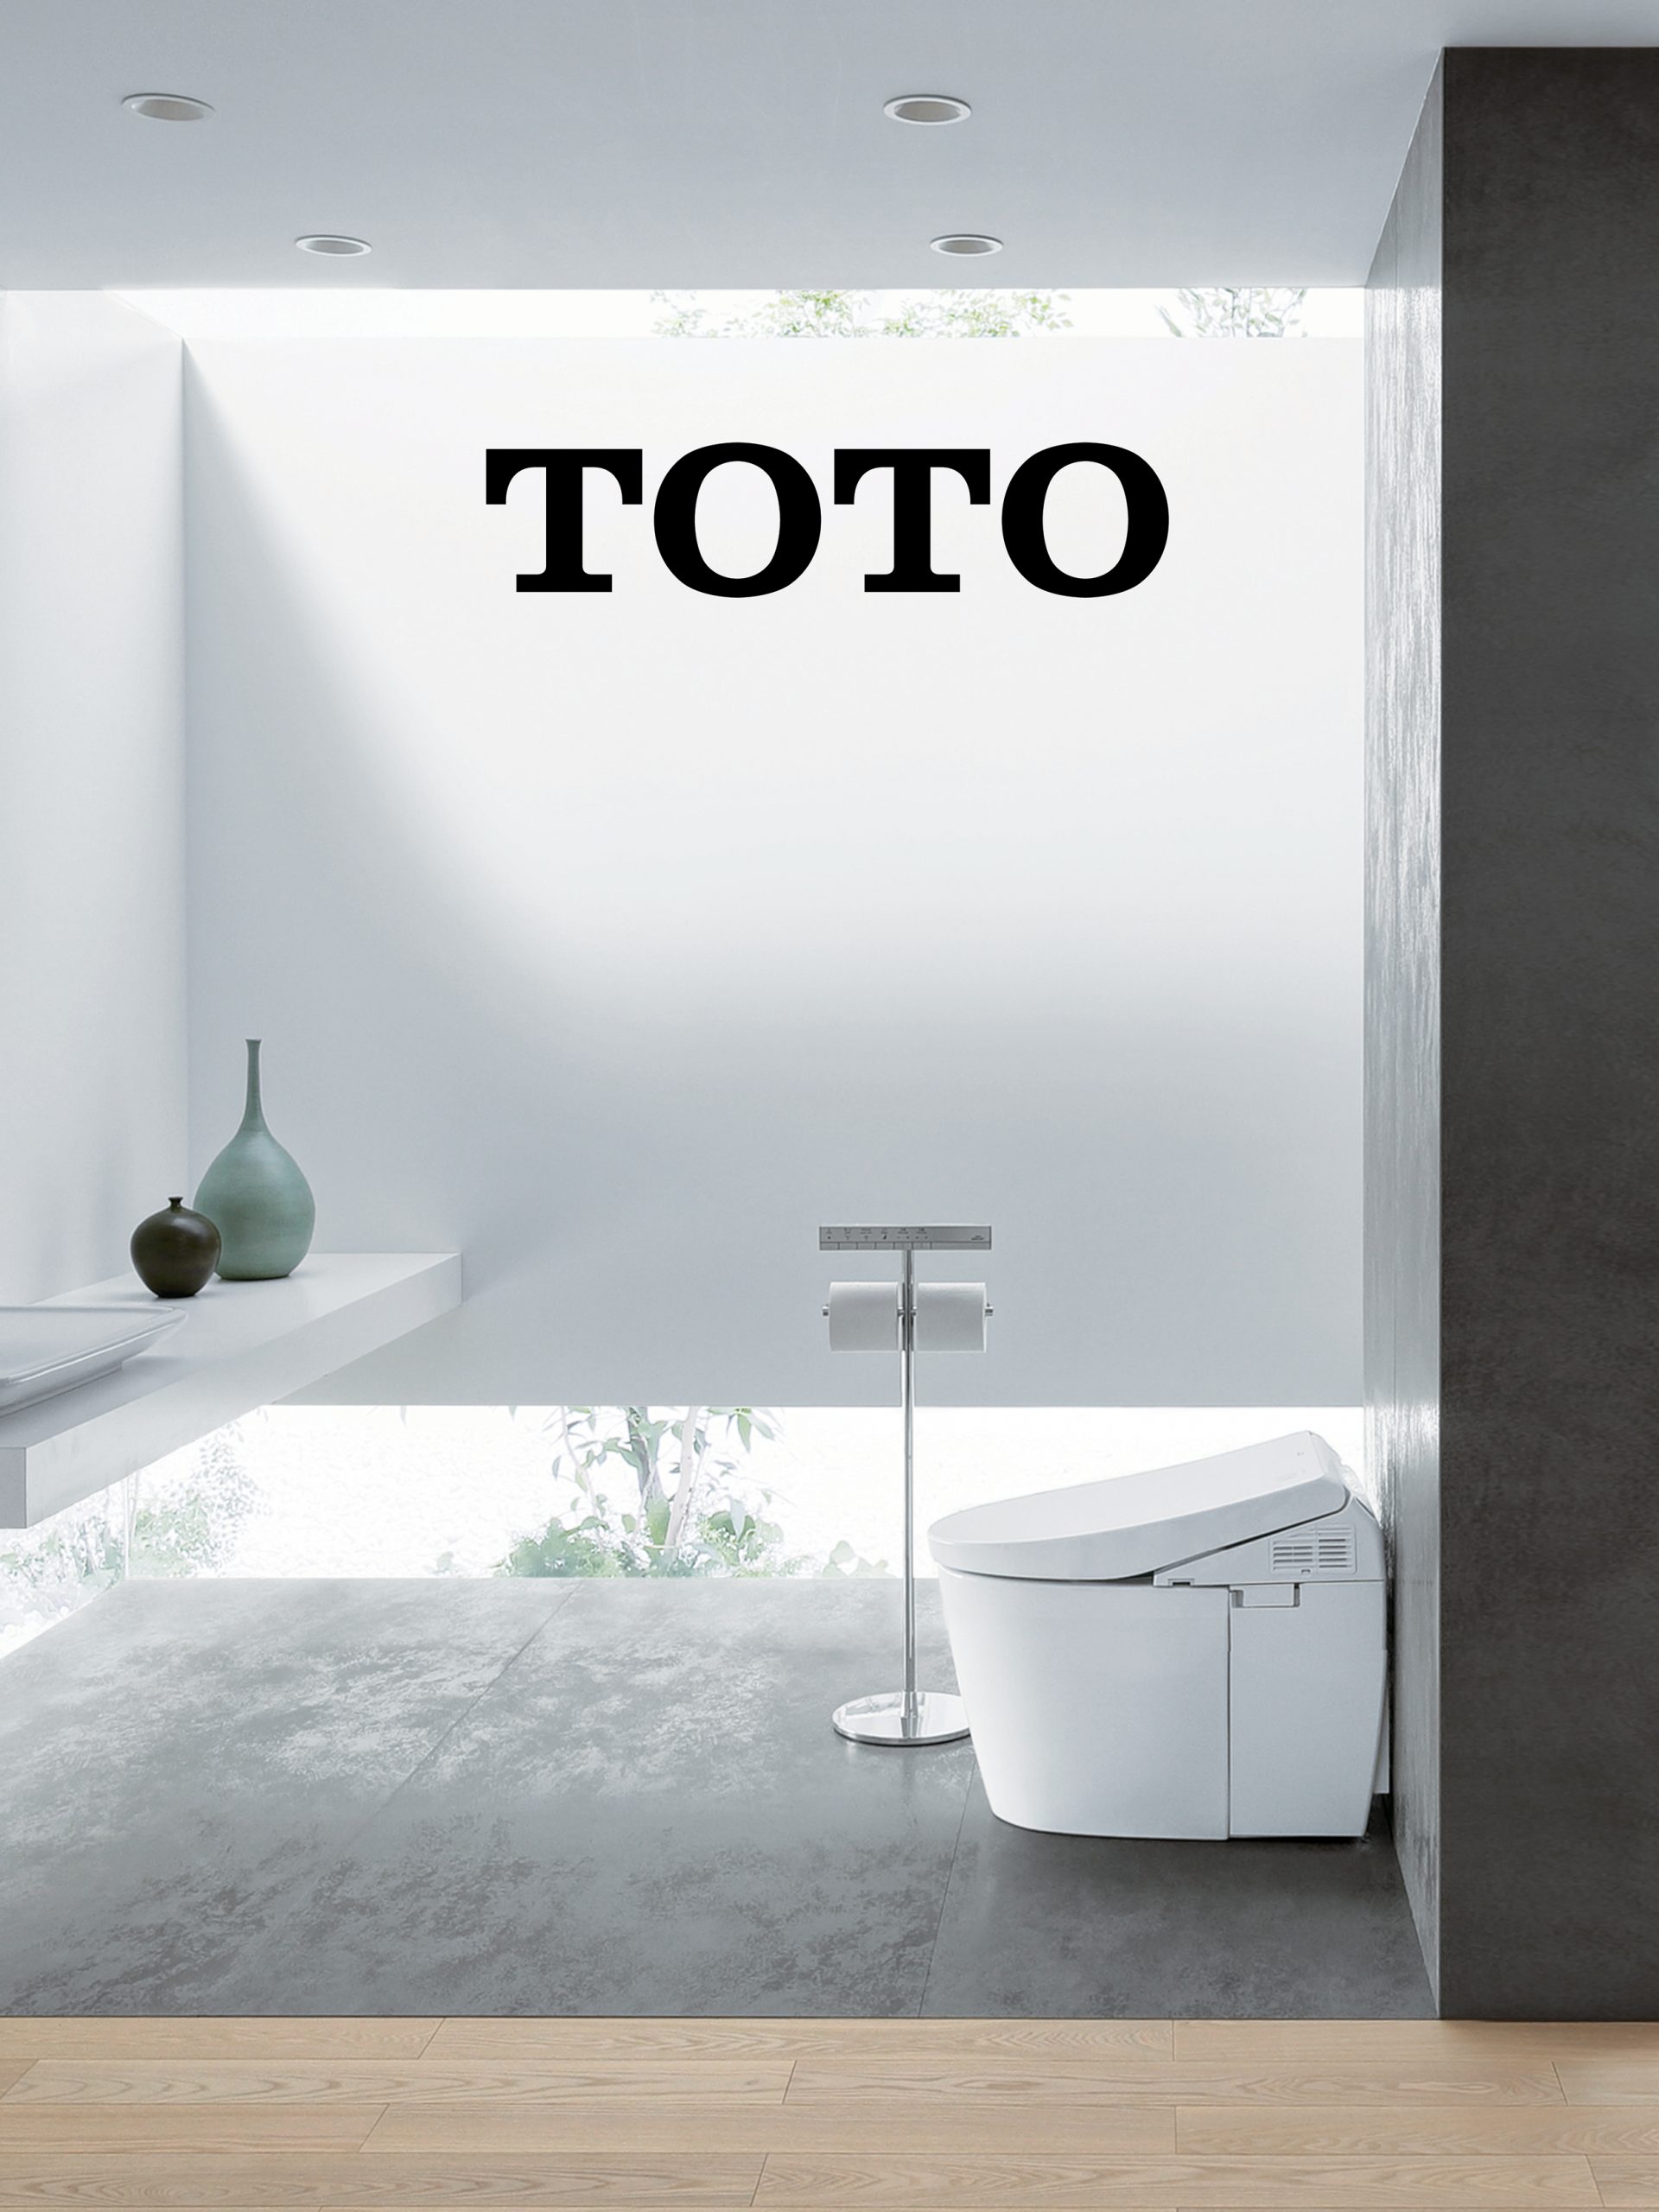 TOTO_BLOG Feature Image